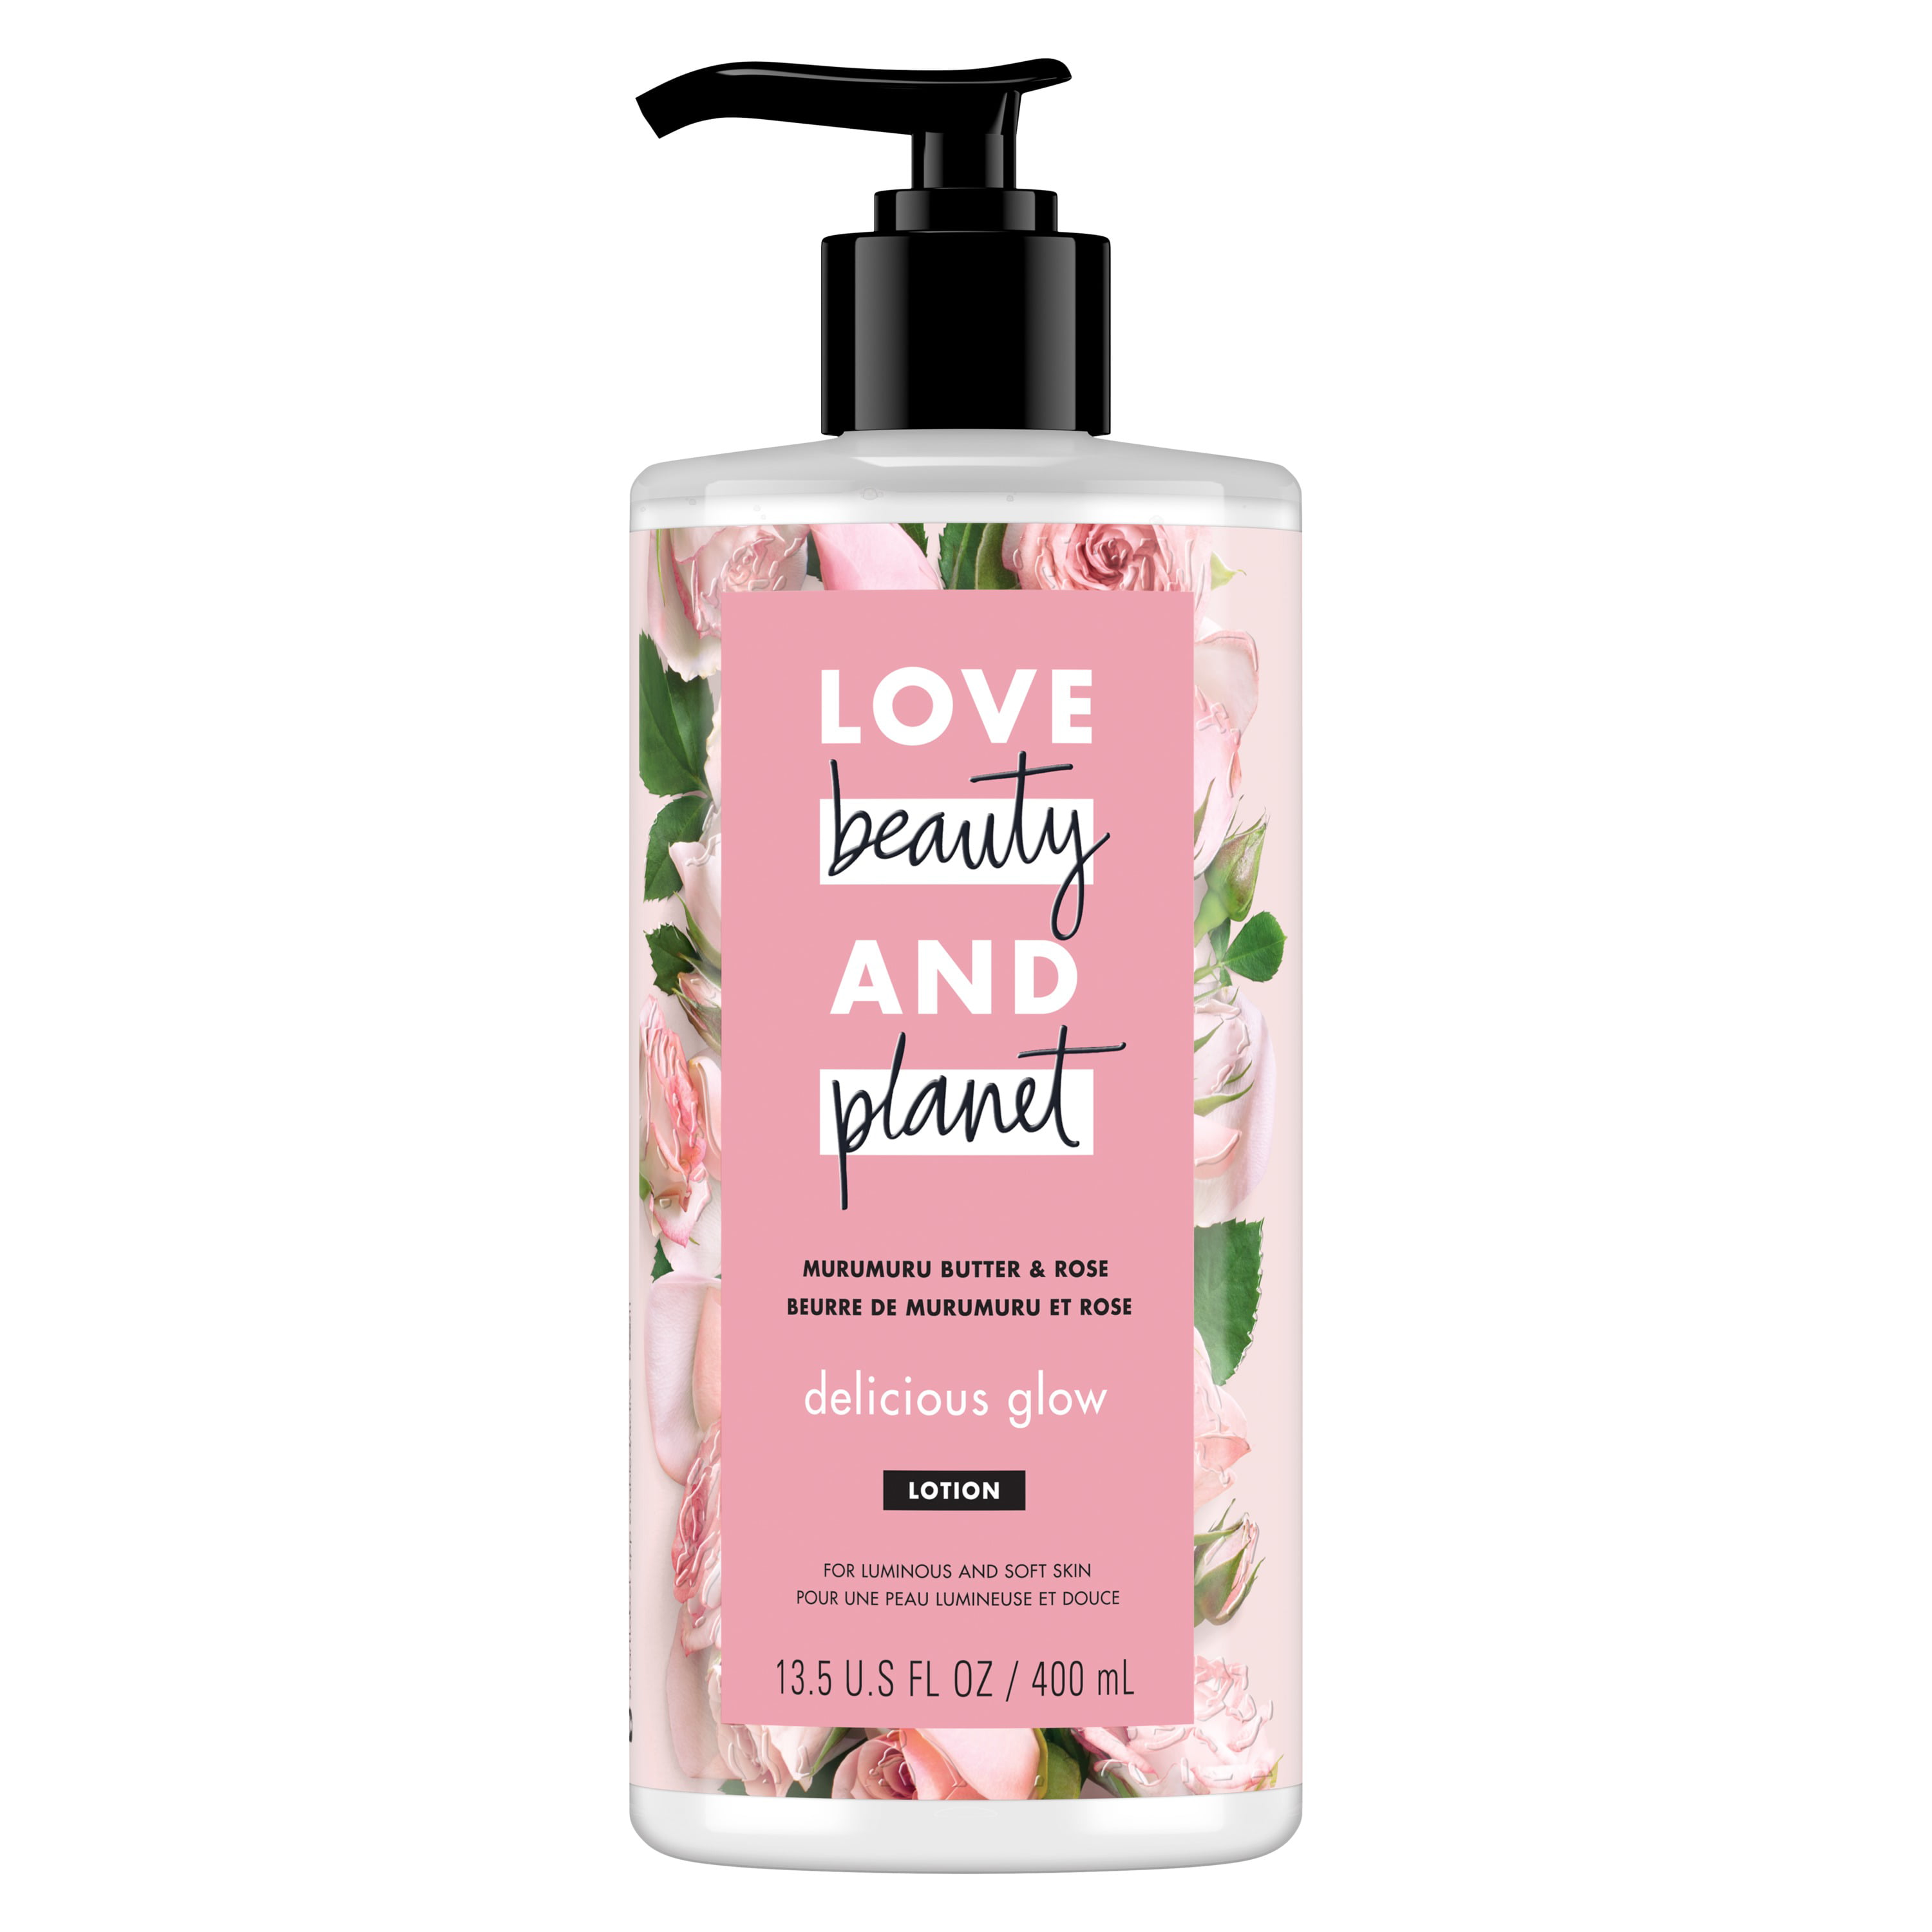 Love Beauty And Planet Murumuru Butter And Rose Body Lotion Delicious Glow 135 Fl Oz Walmart 